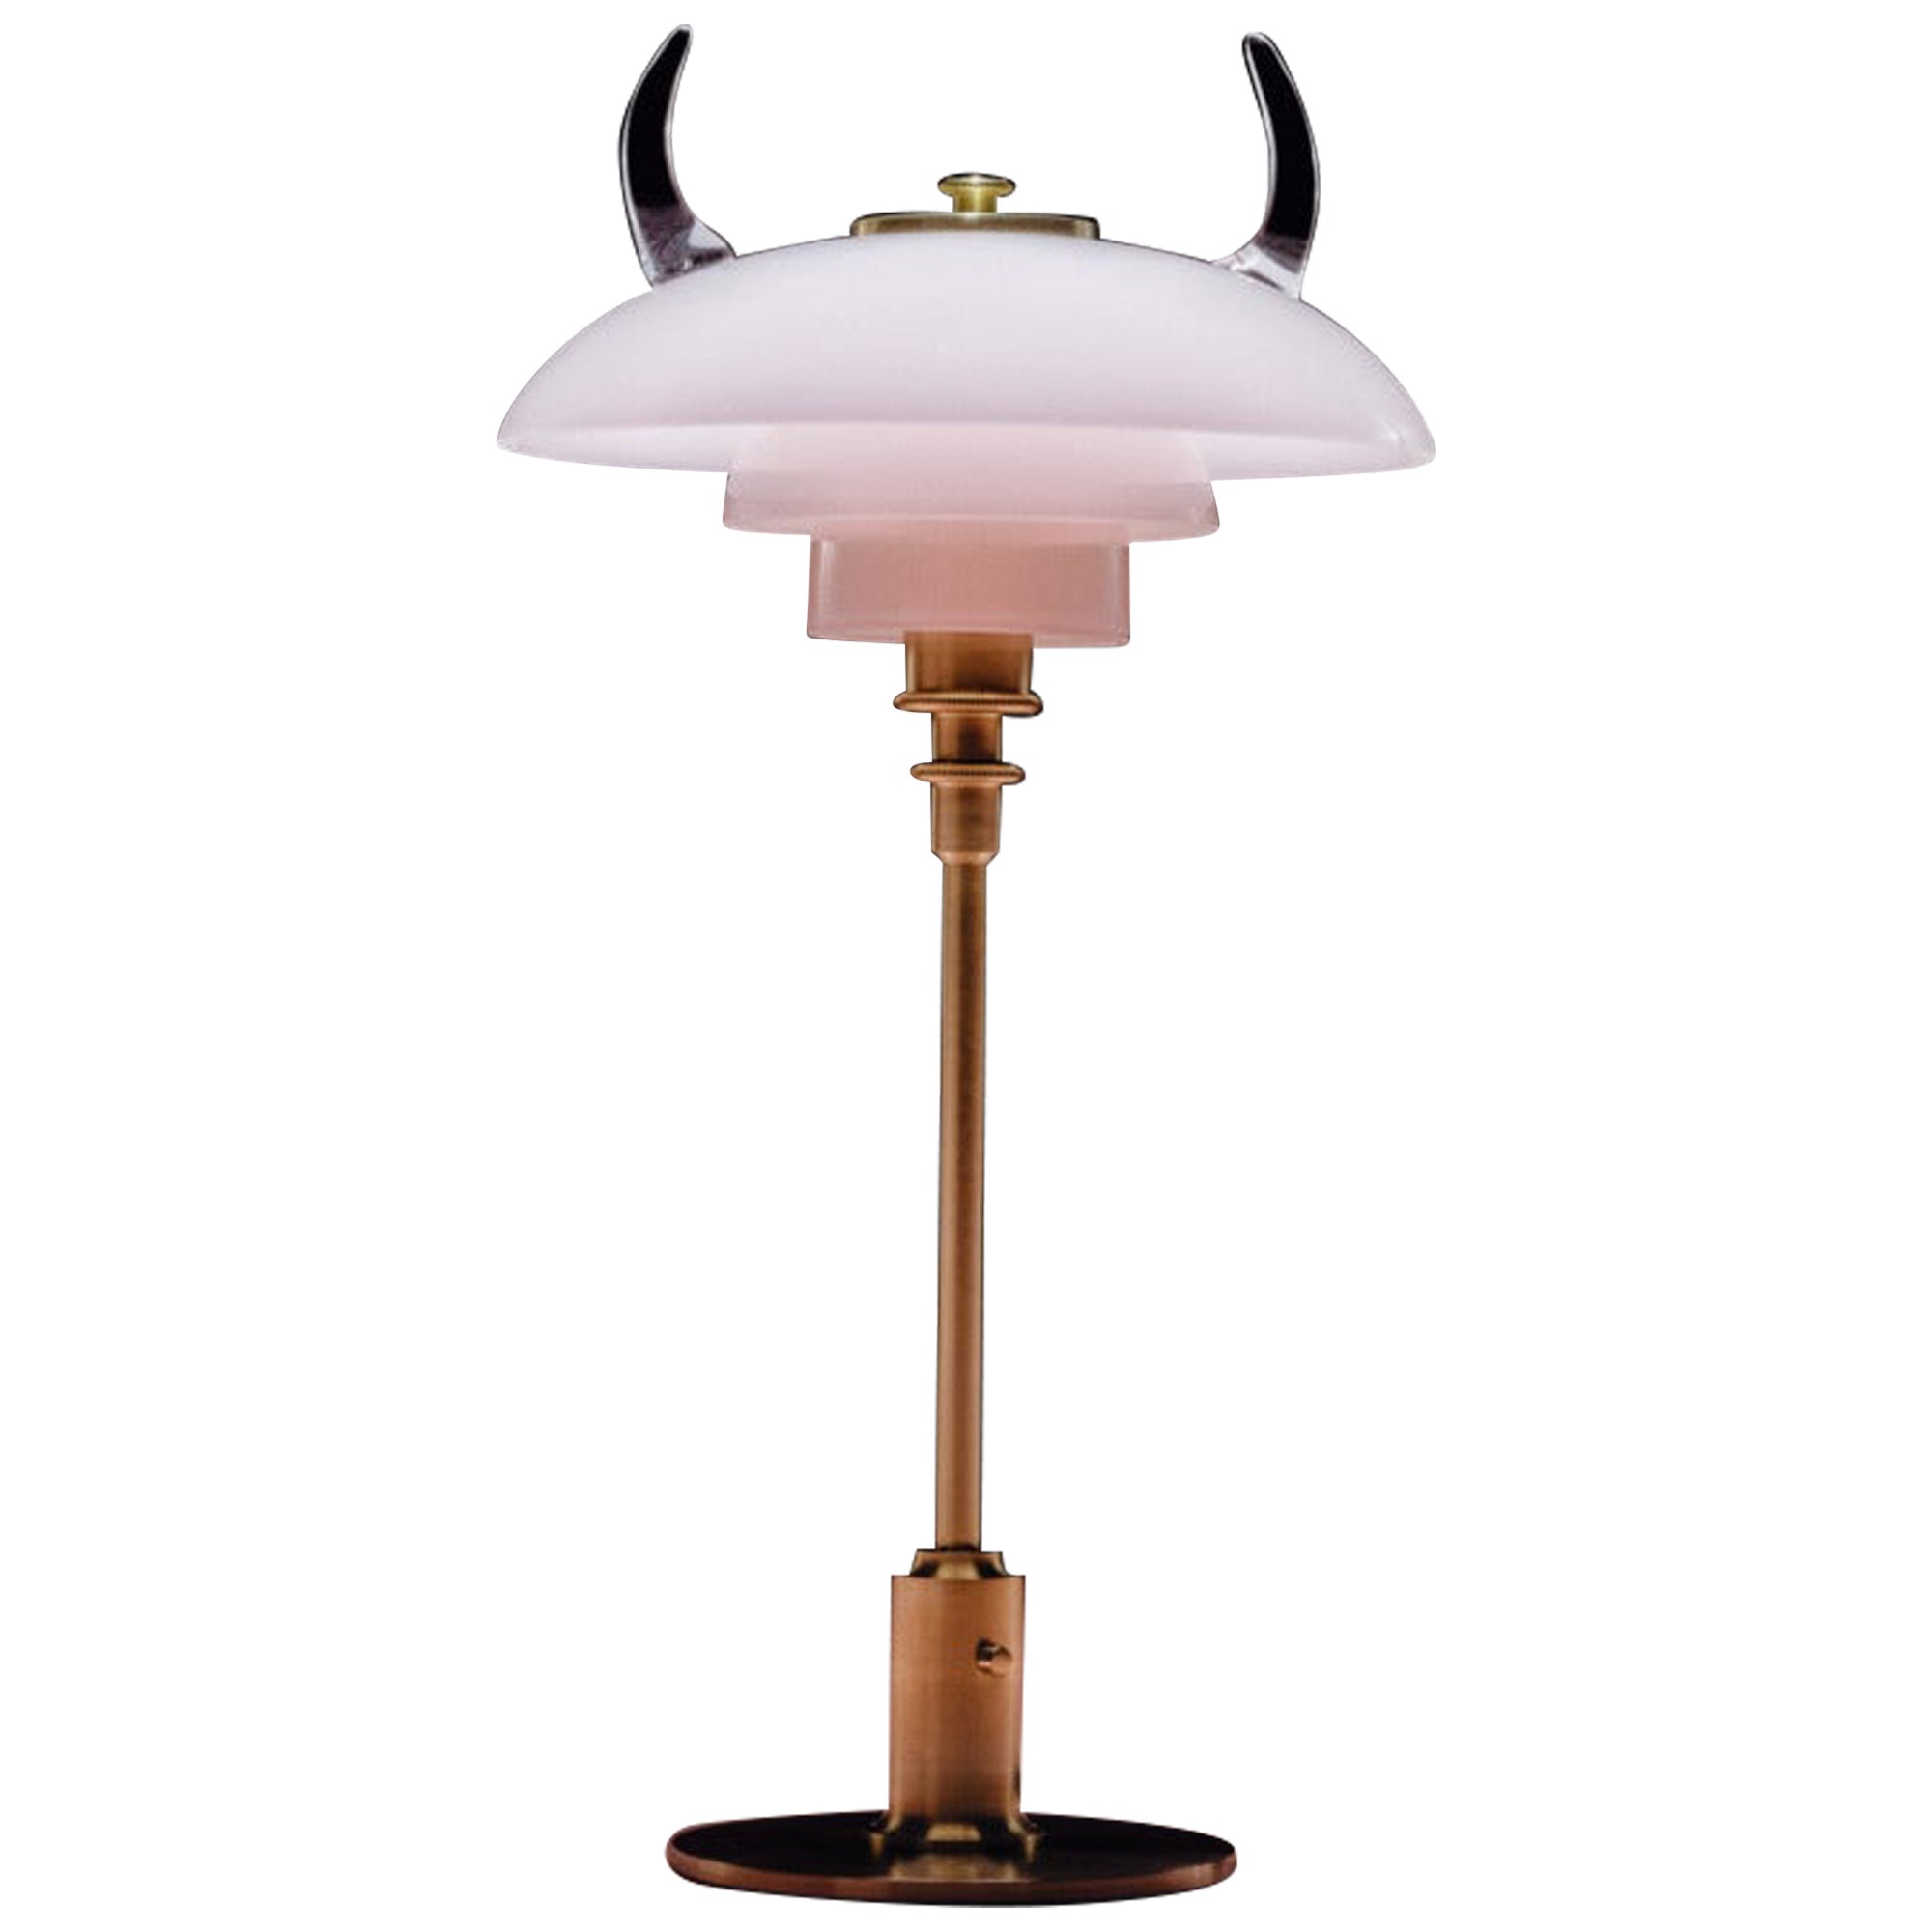 "Prima" table lamp by Home in Heven for Louis Poulsen